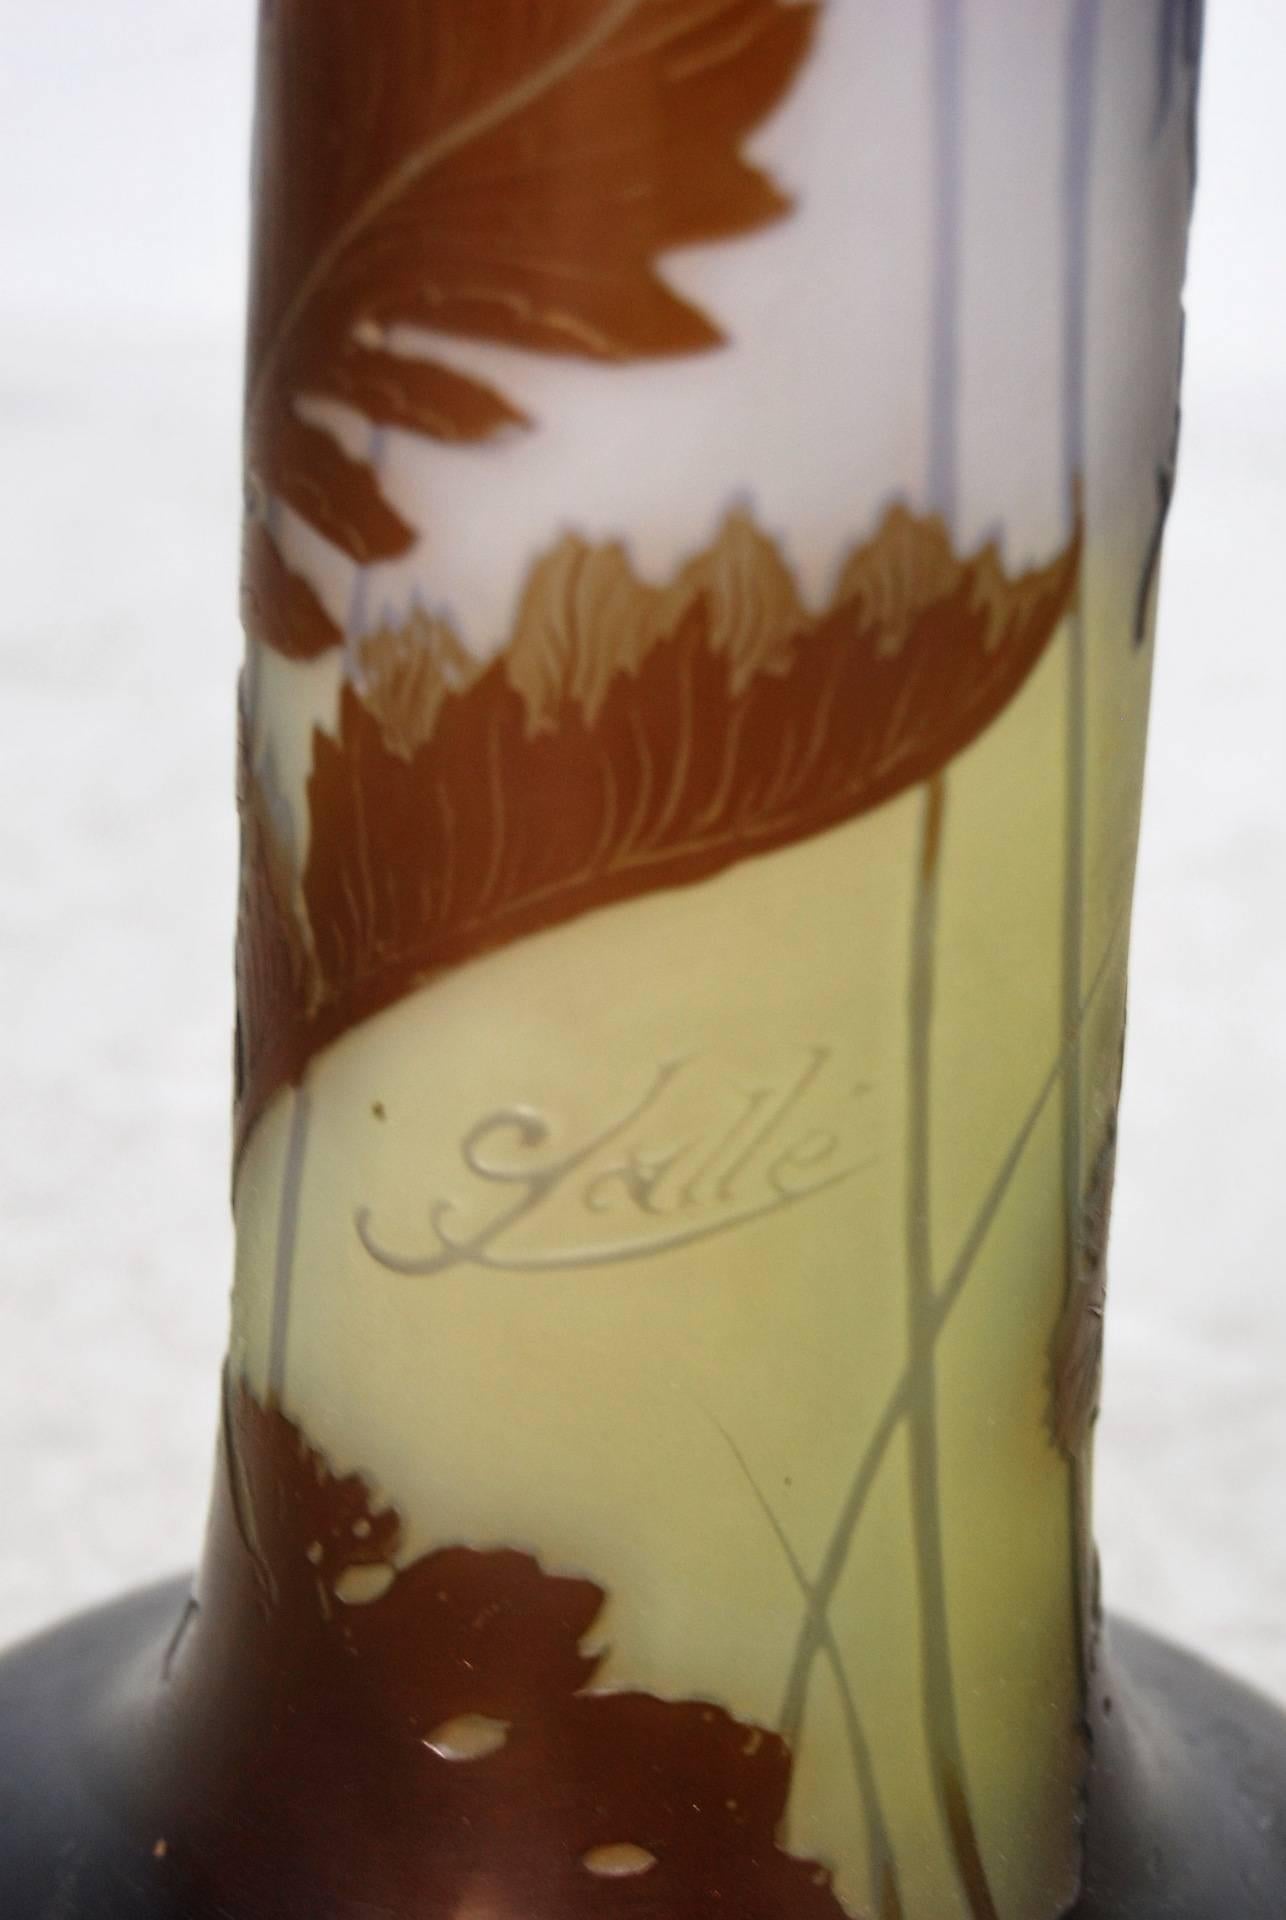 Early 20th Century French Art Nouveau Vase by Emile Gallé